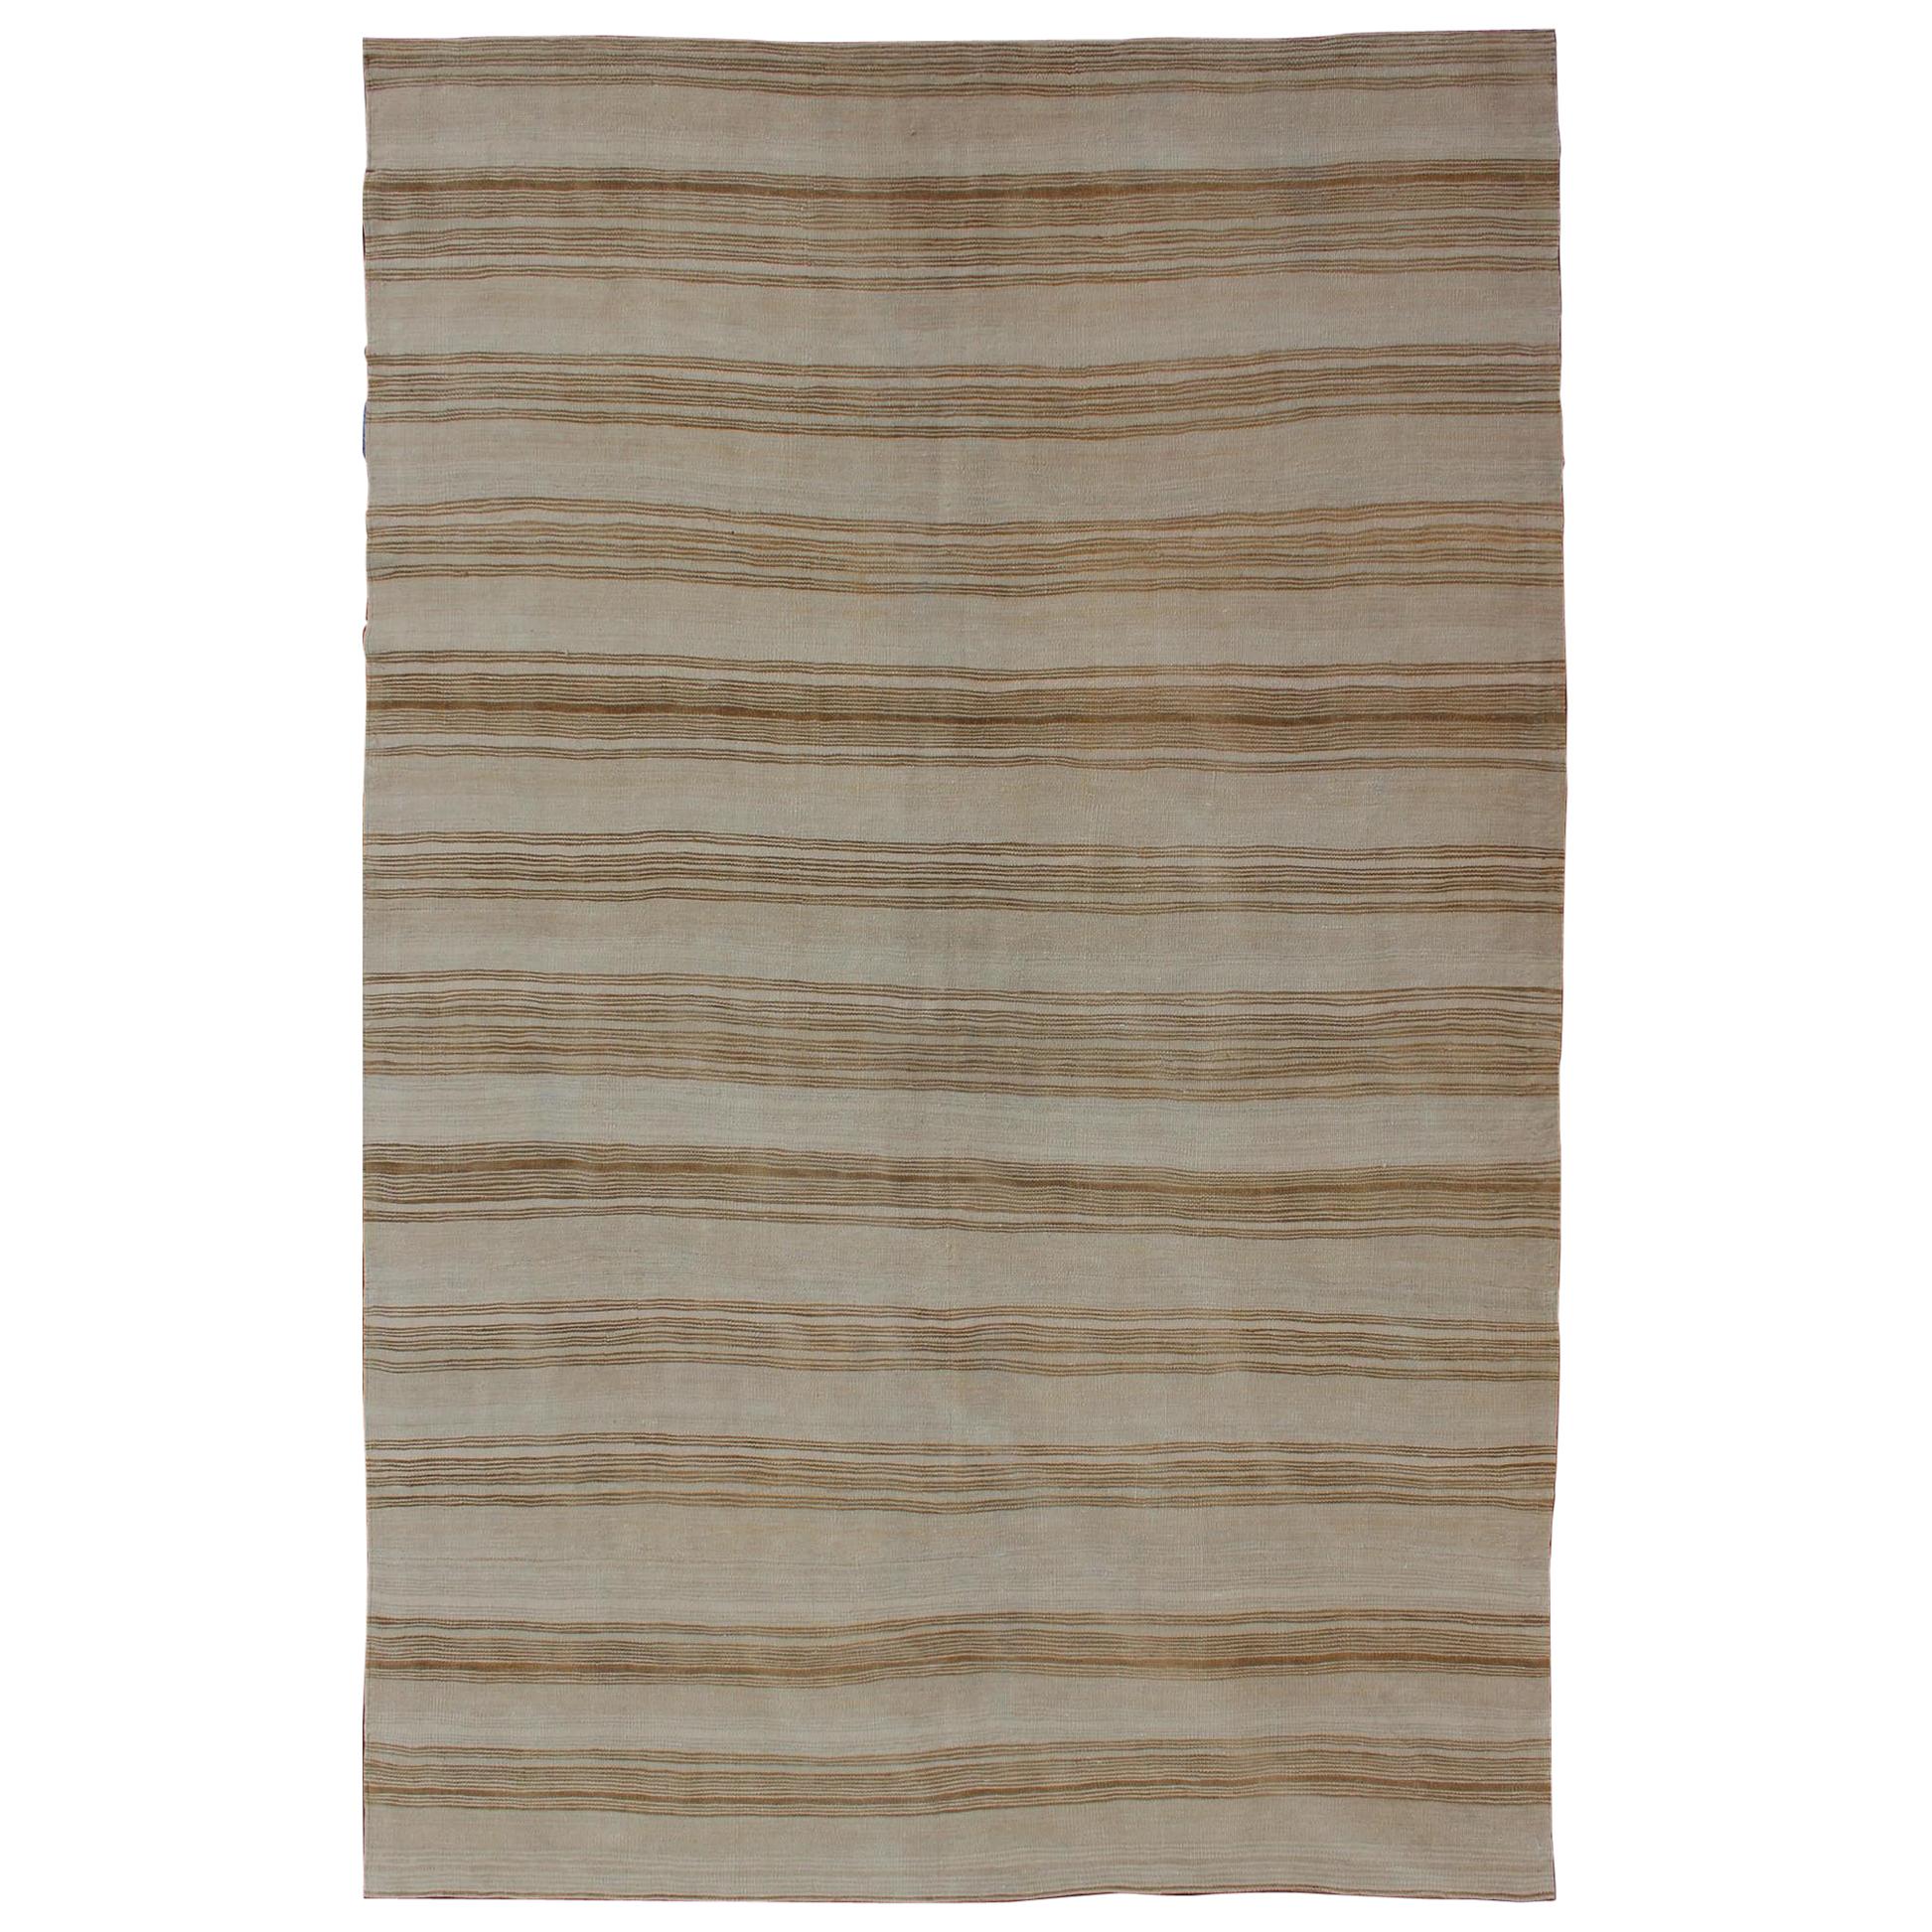 Vintage Turkish Flat-Weave Striped Kilim in Taupe, Brown and Tan Colors